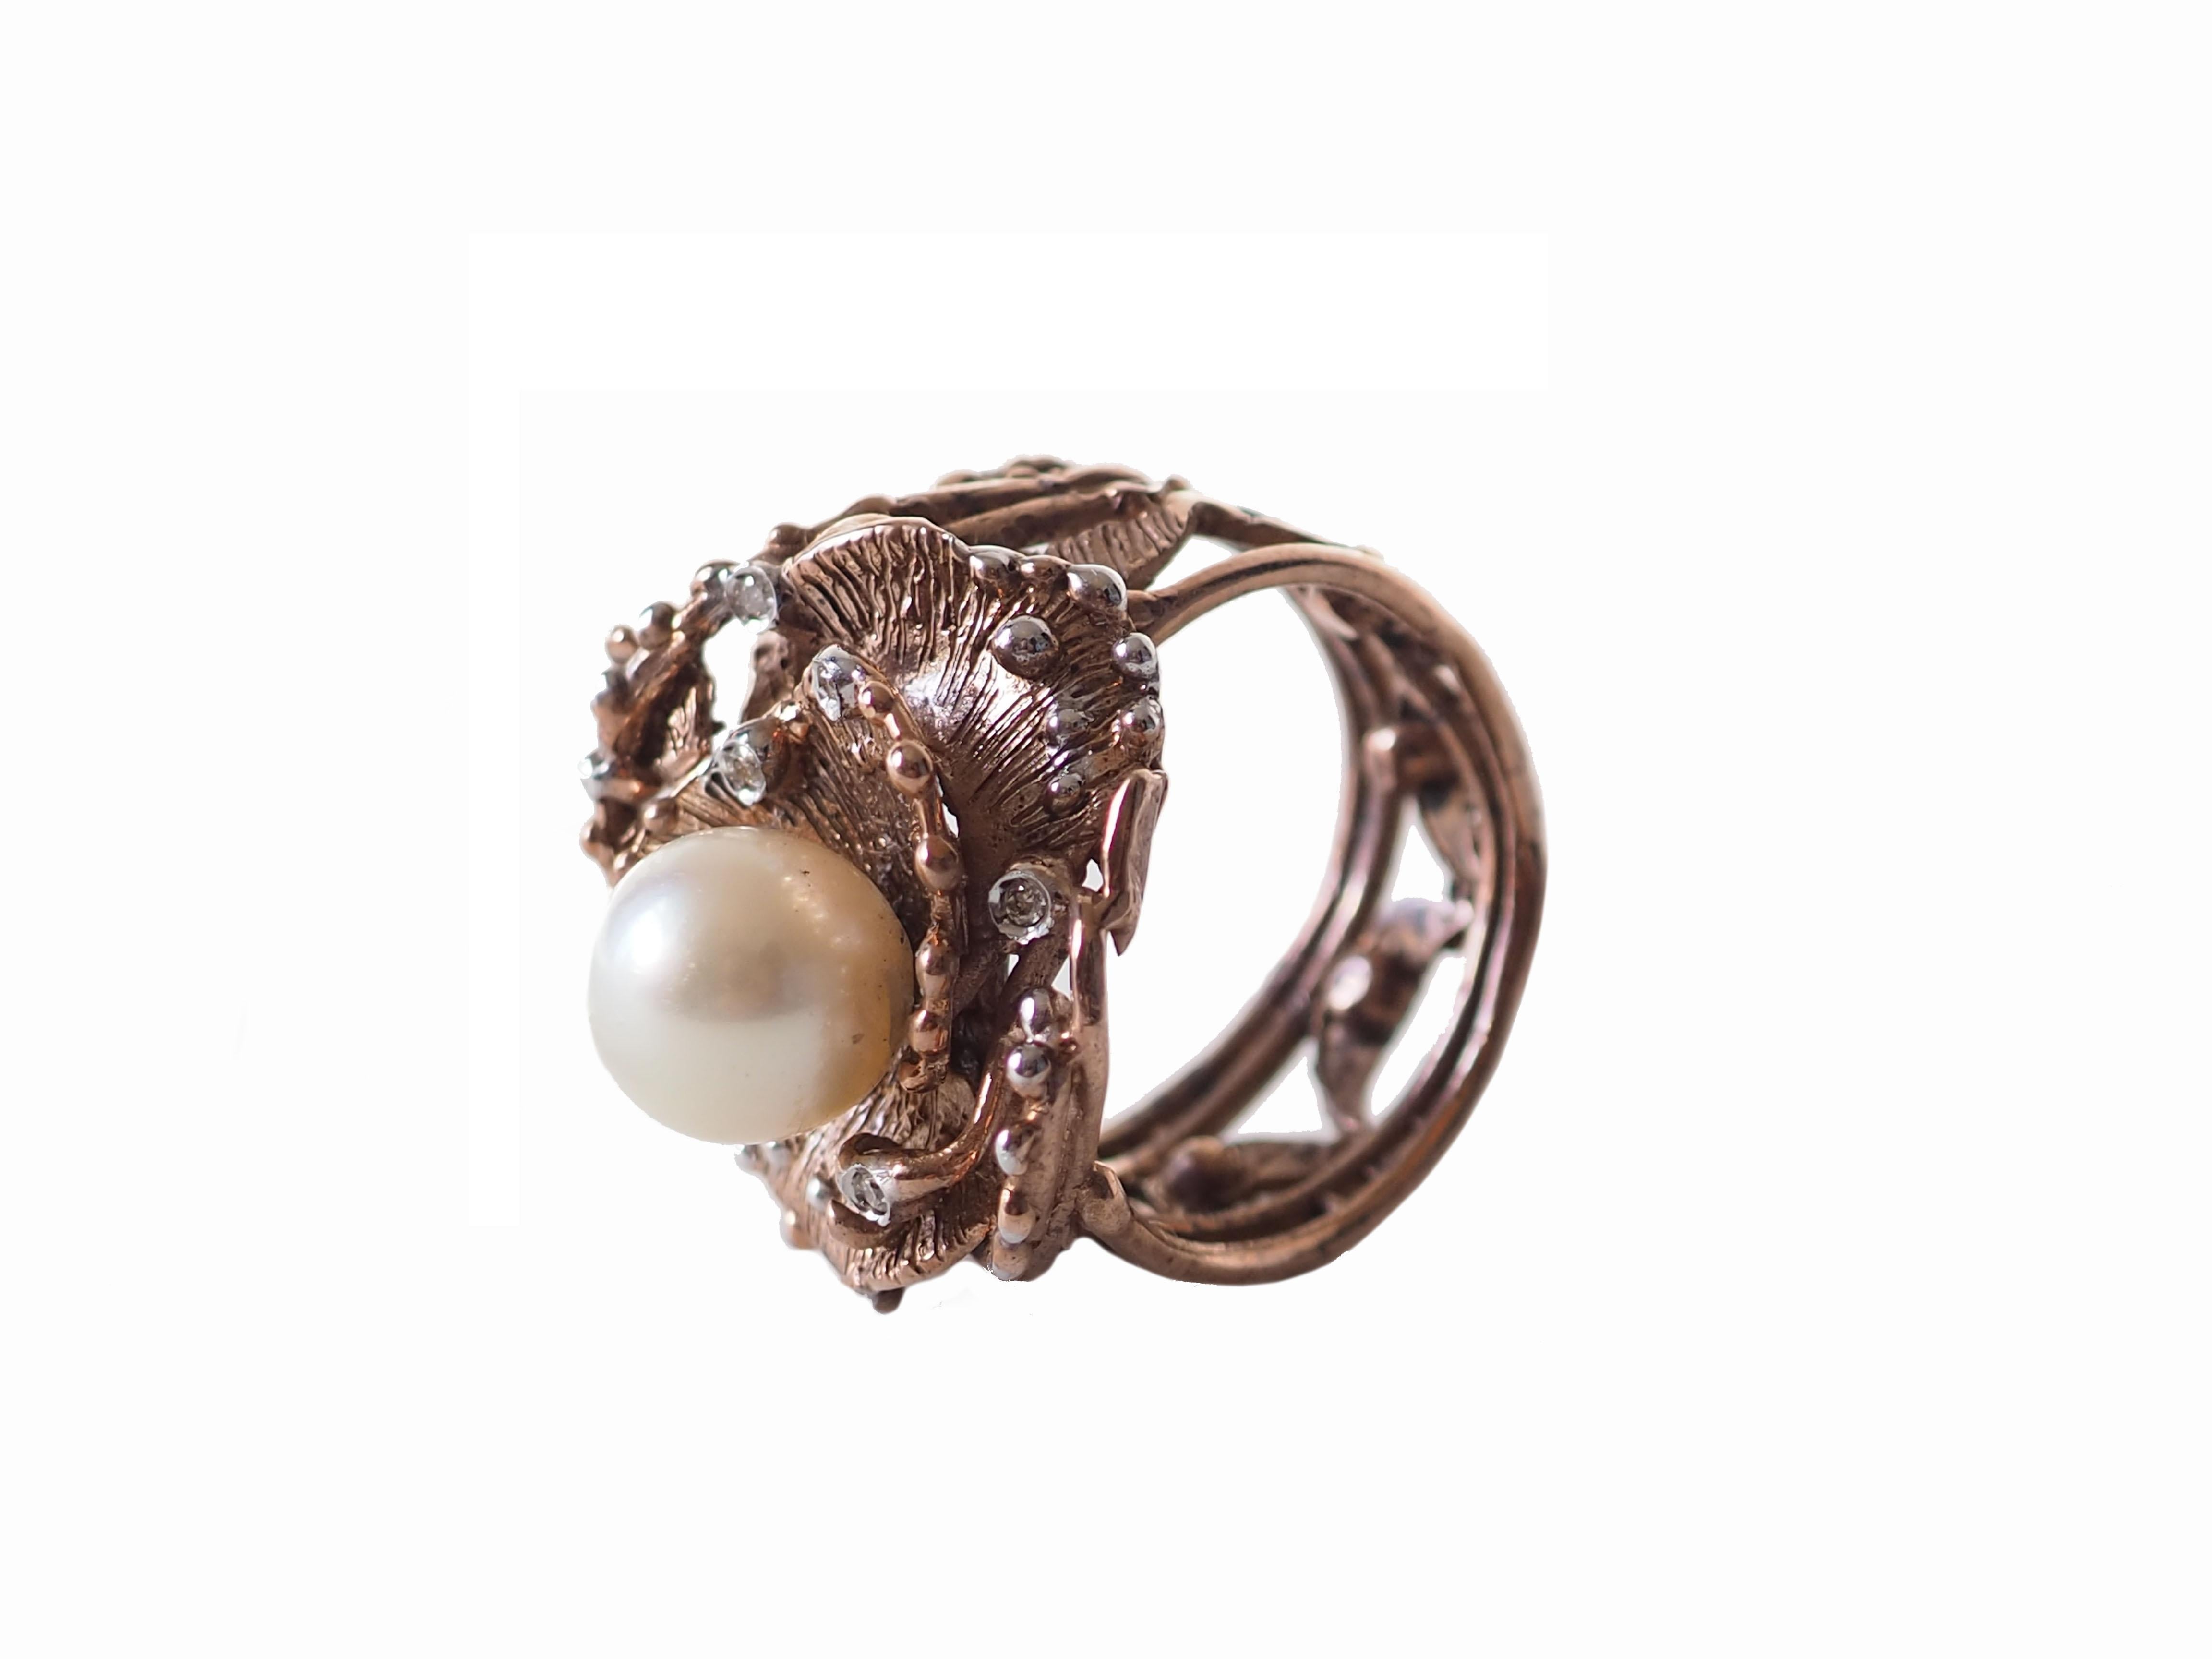 Uncut Natural White Pearls Bronze Diamonds Ring For Sale